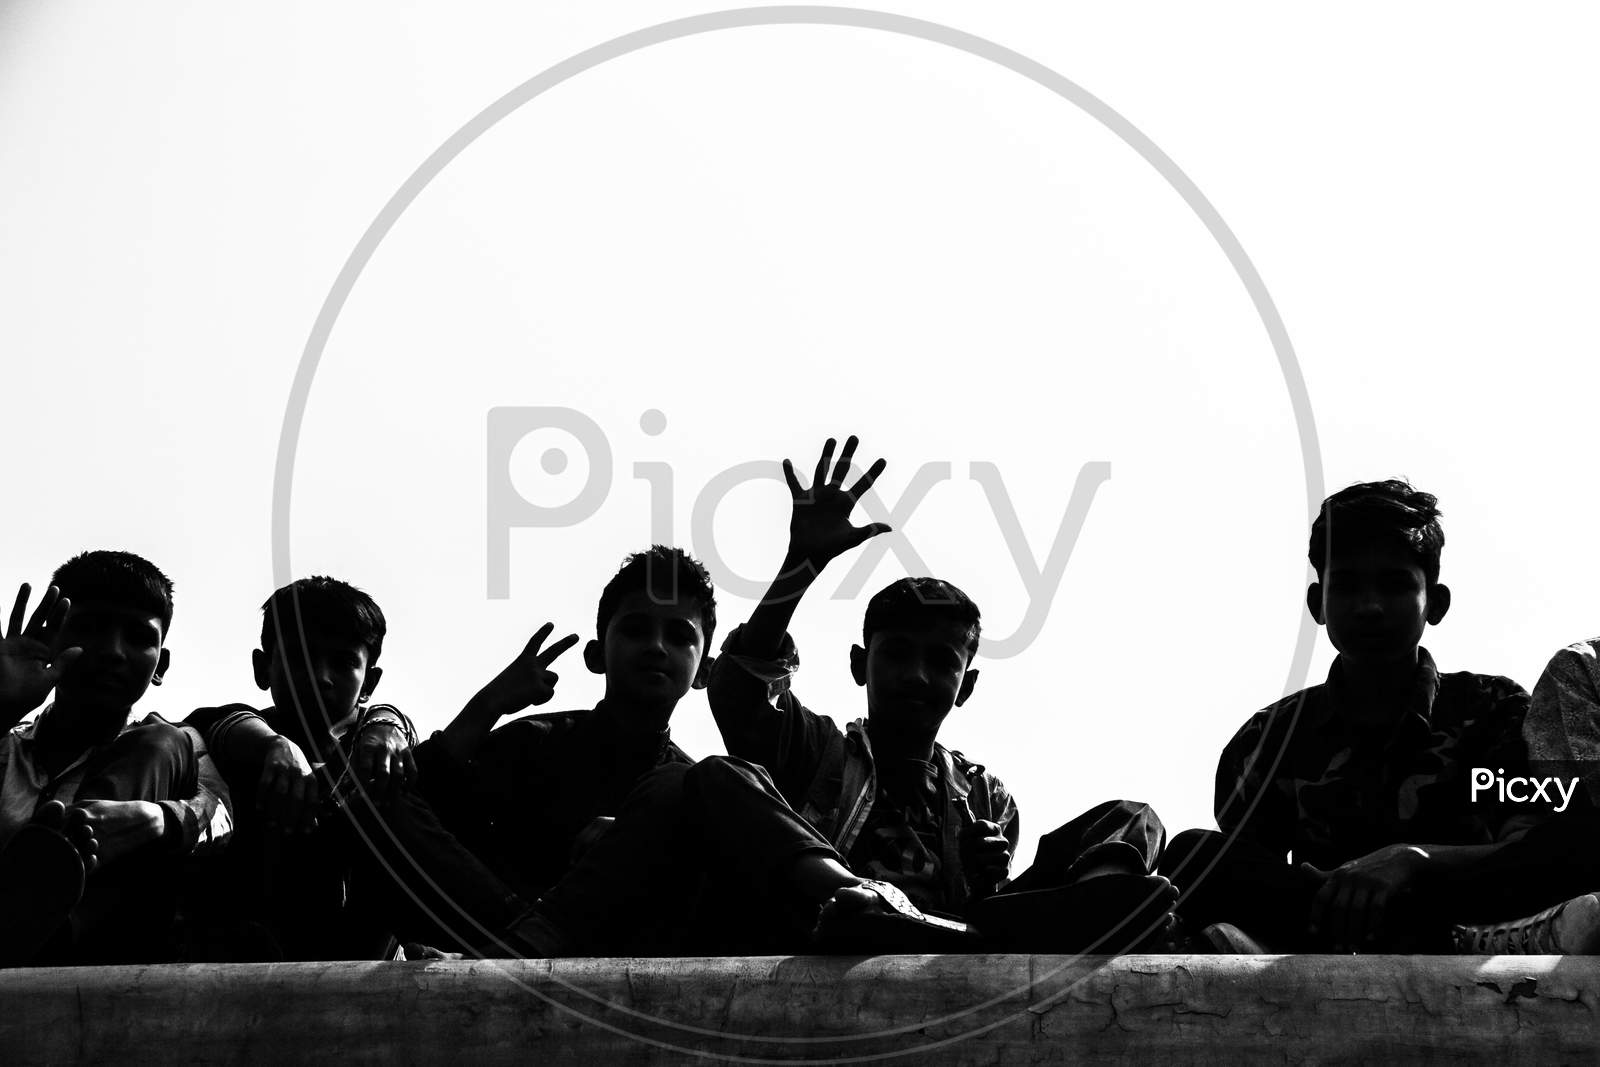 Children Are Enjoying on The train Roof I Captured This Image on 19Th February 2019 From Tonggi, Bangladesh, Asia, South Asia